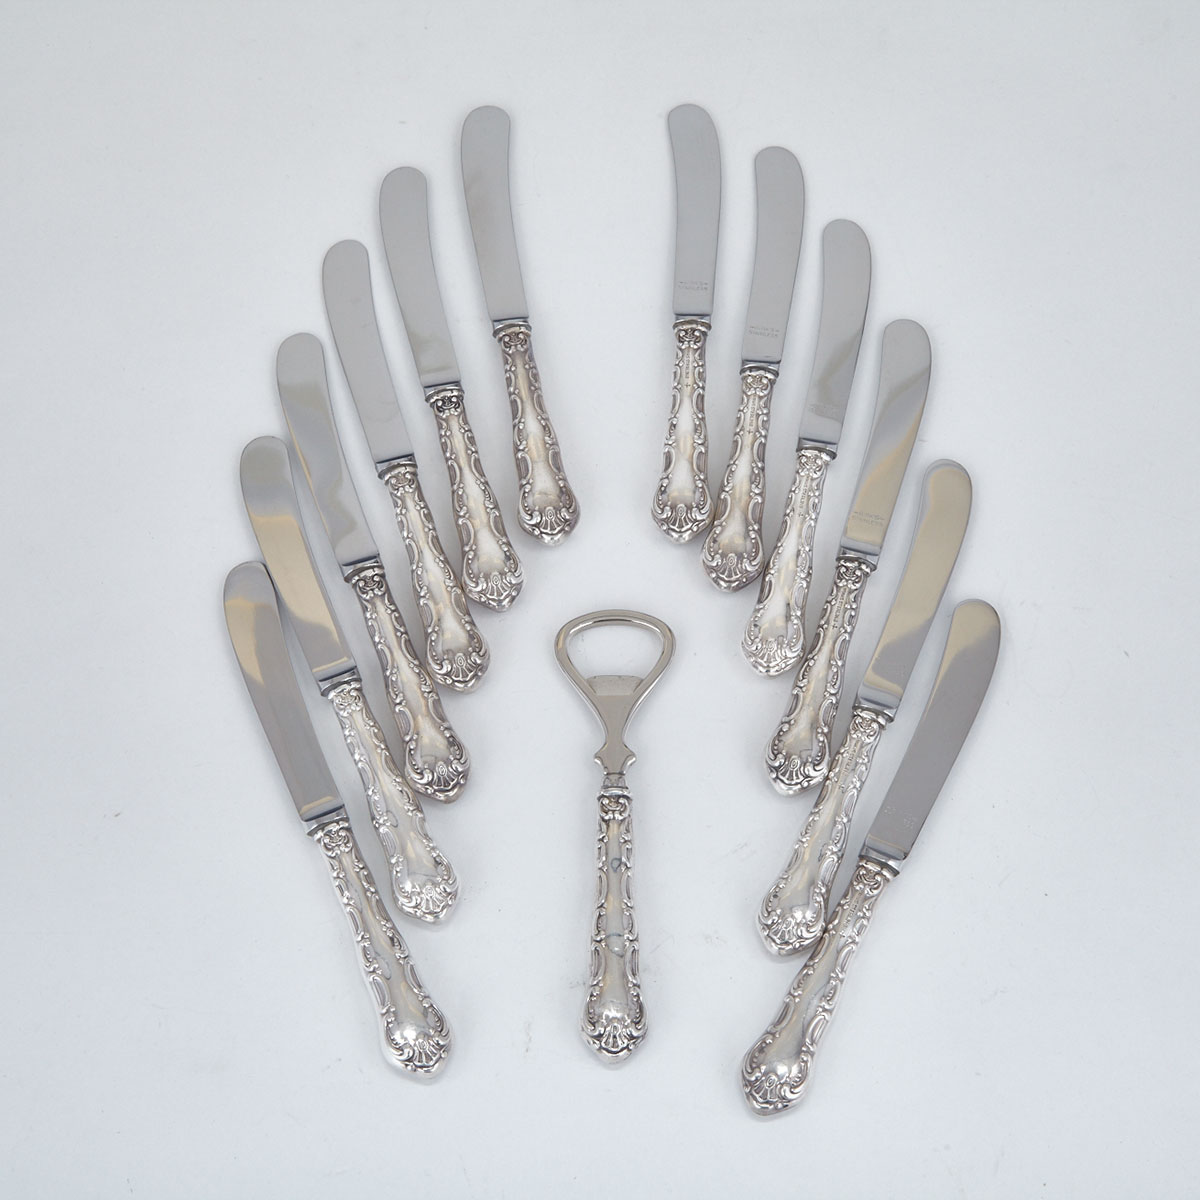 Twelve Canadian Silver ‘Pompadour’ Pattern Tea Knives and a Bottle Opener, Henry Birks & Sons, Montreal. Que., 20th century